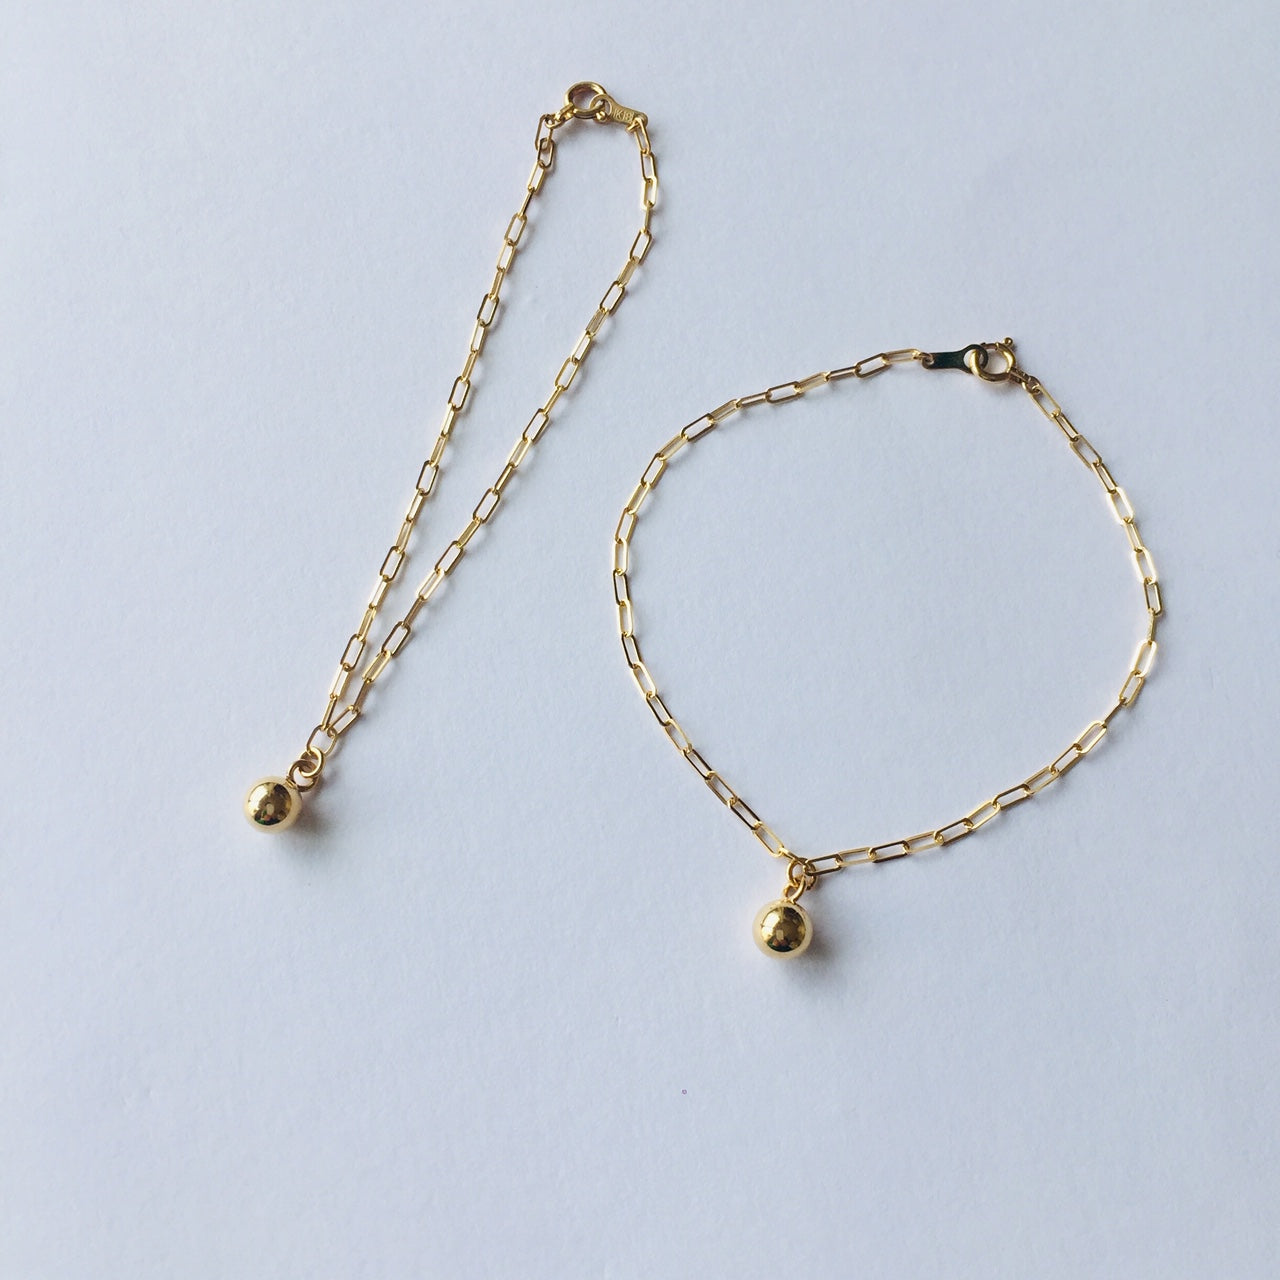 18K Gold Box Chain Bracelet with Gold Ball / Sphere Charm For Women  ゴールドボール・チャーム・ブレスレット